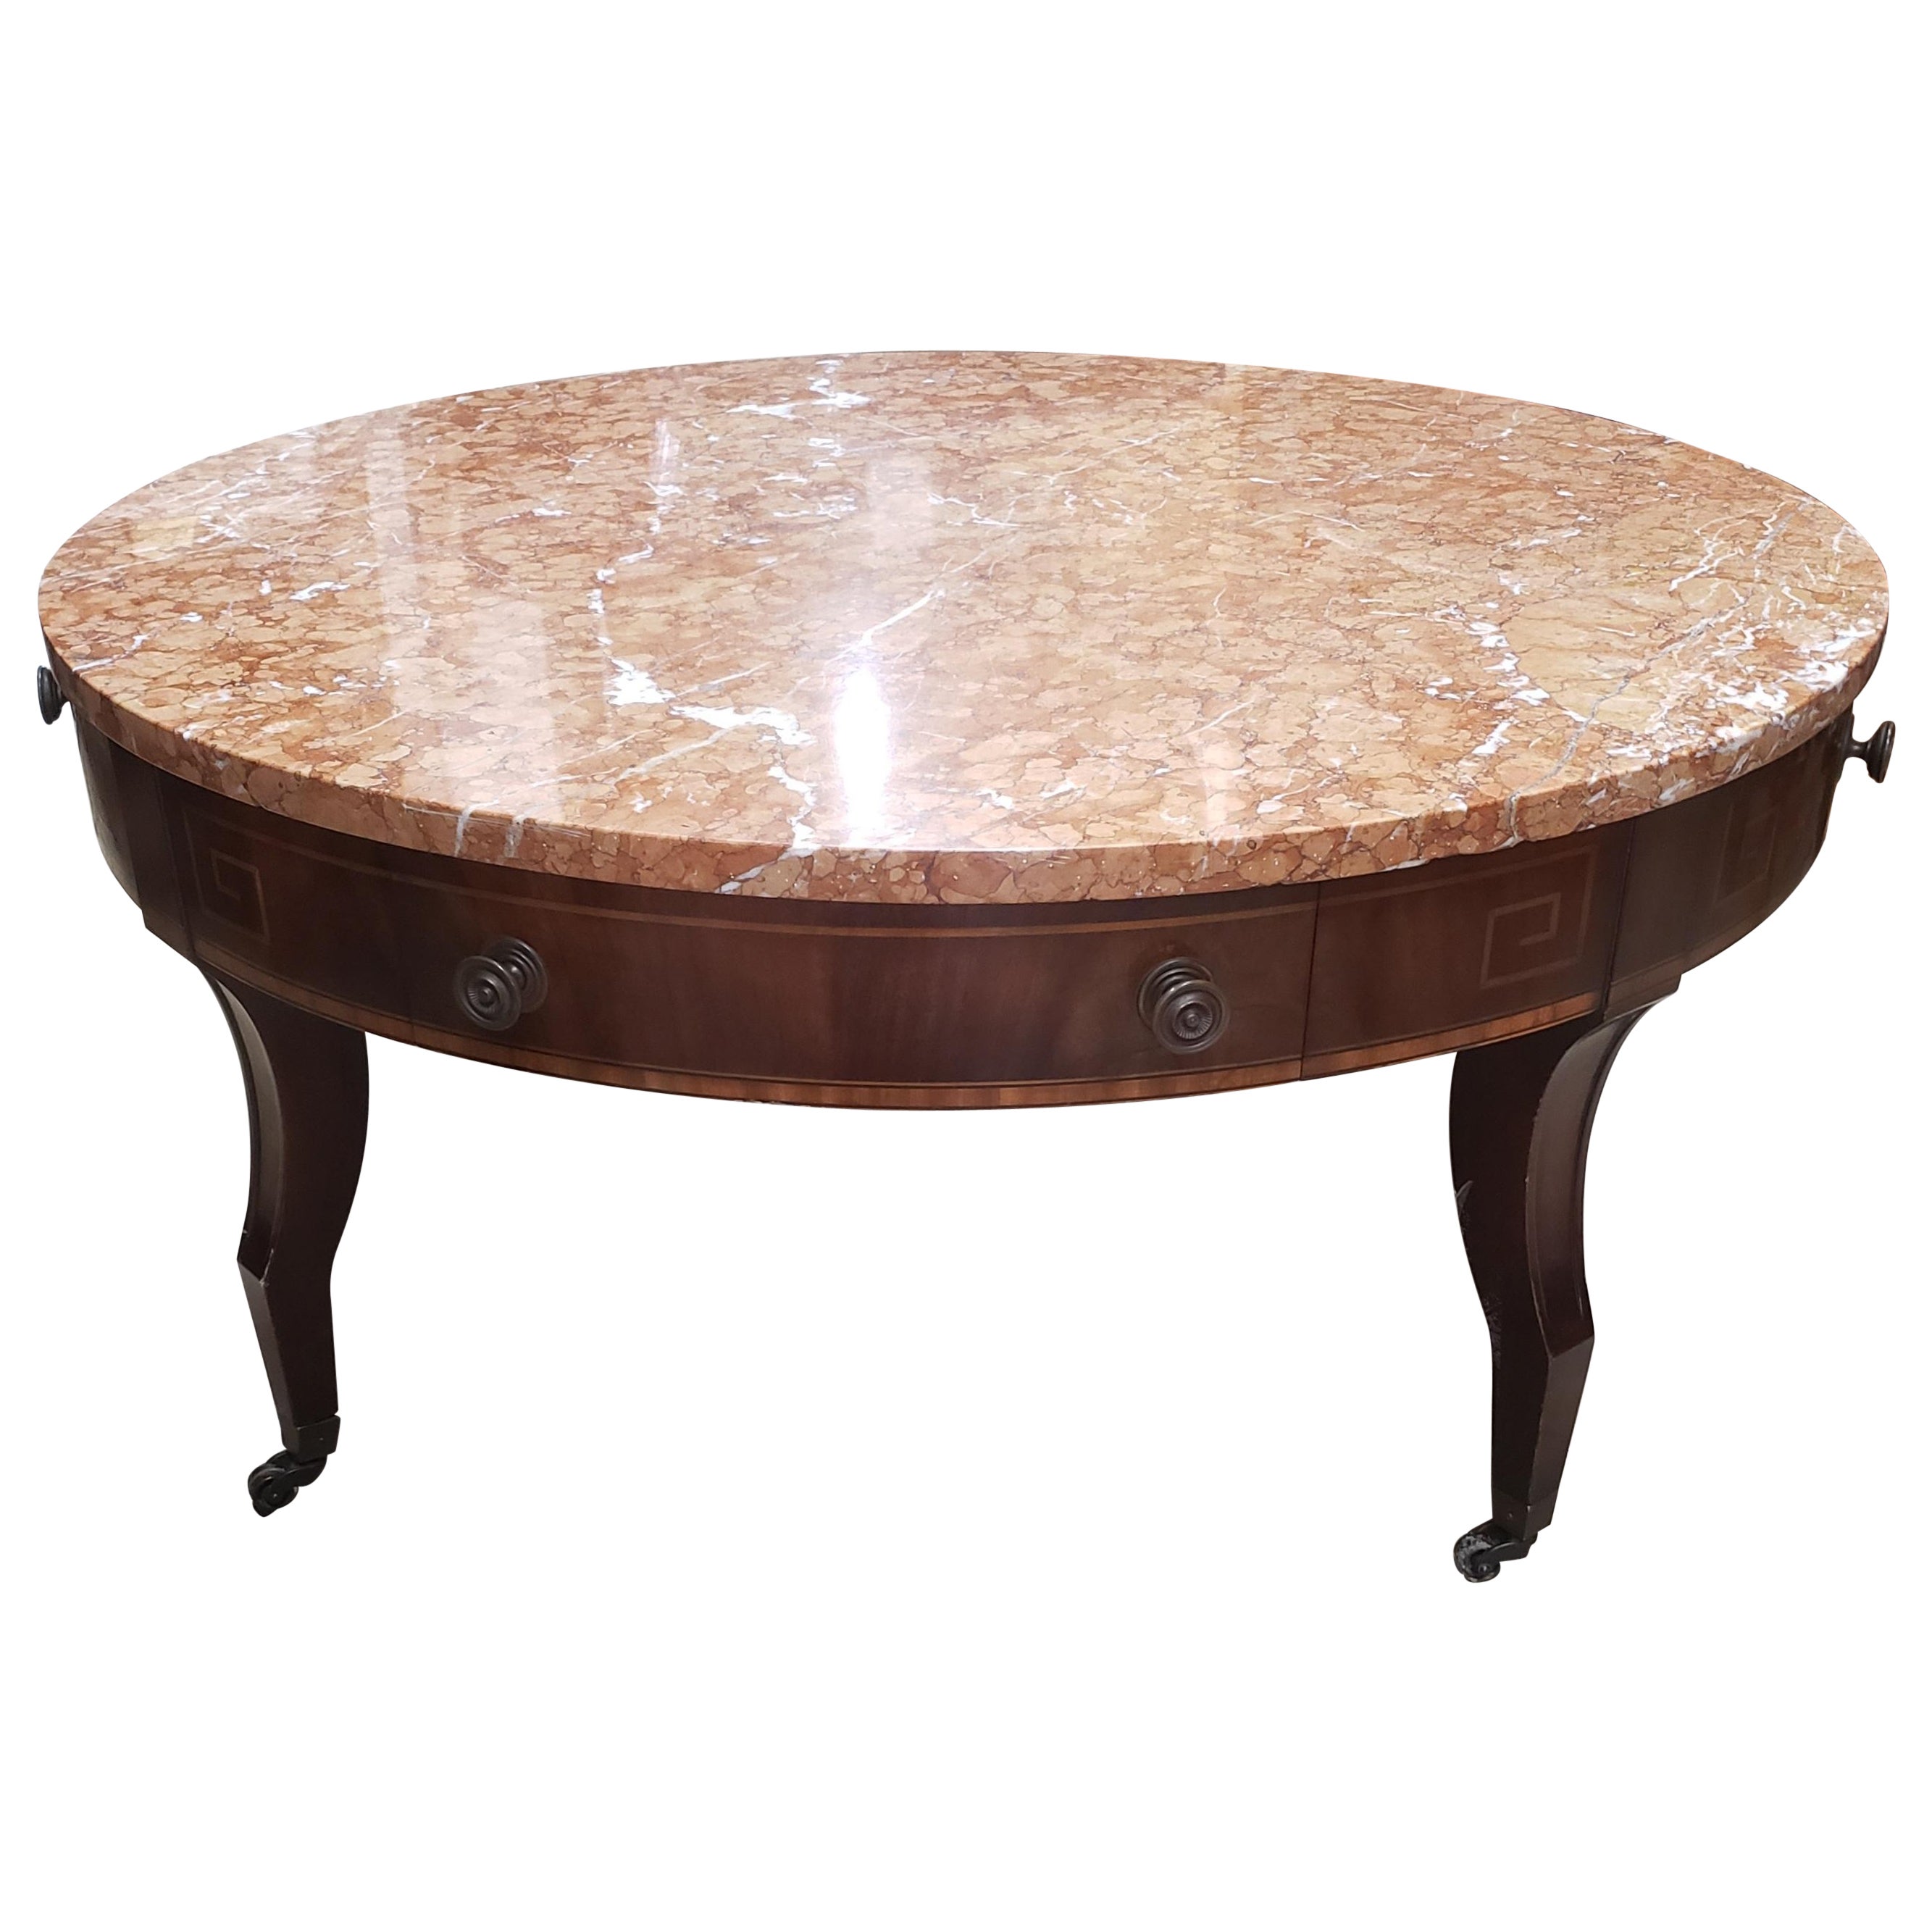 1960s Weiman Heirloom Hollywood Regency Mahogany and Satinwood Carrara Mable Top For Sale